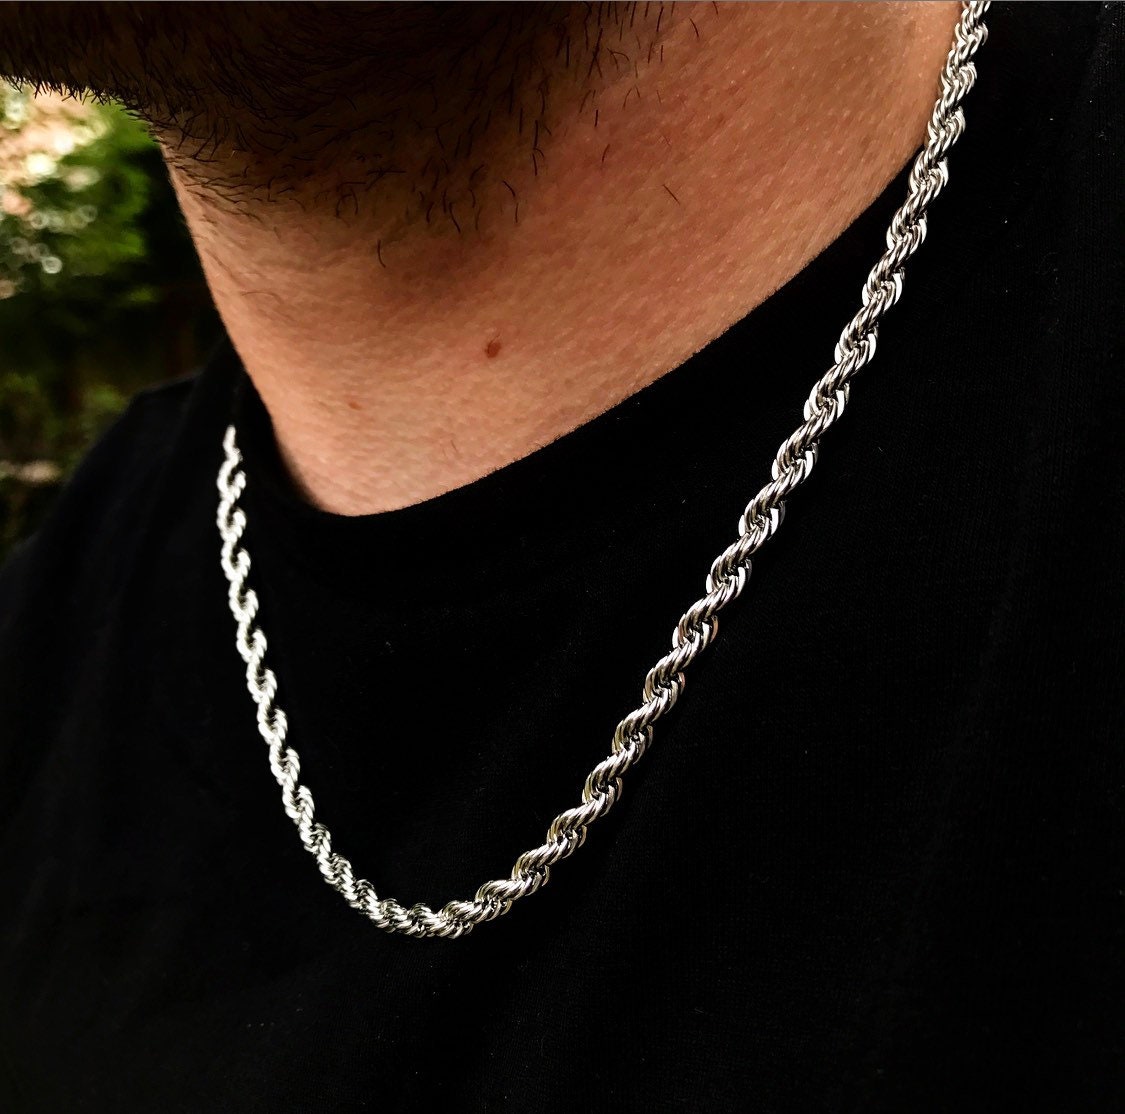 Silver Rope Chain, 5mm Thick Link Chain Necklace for Men, Mens / Boys Chain,  Chunky Silver Rope Chain Mens Jewellery by Twistedpendant -  Singapore